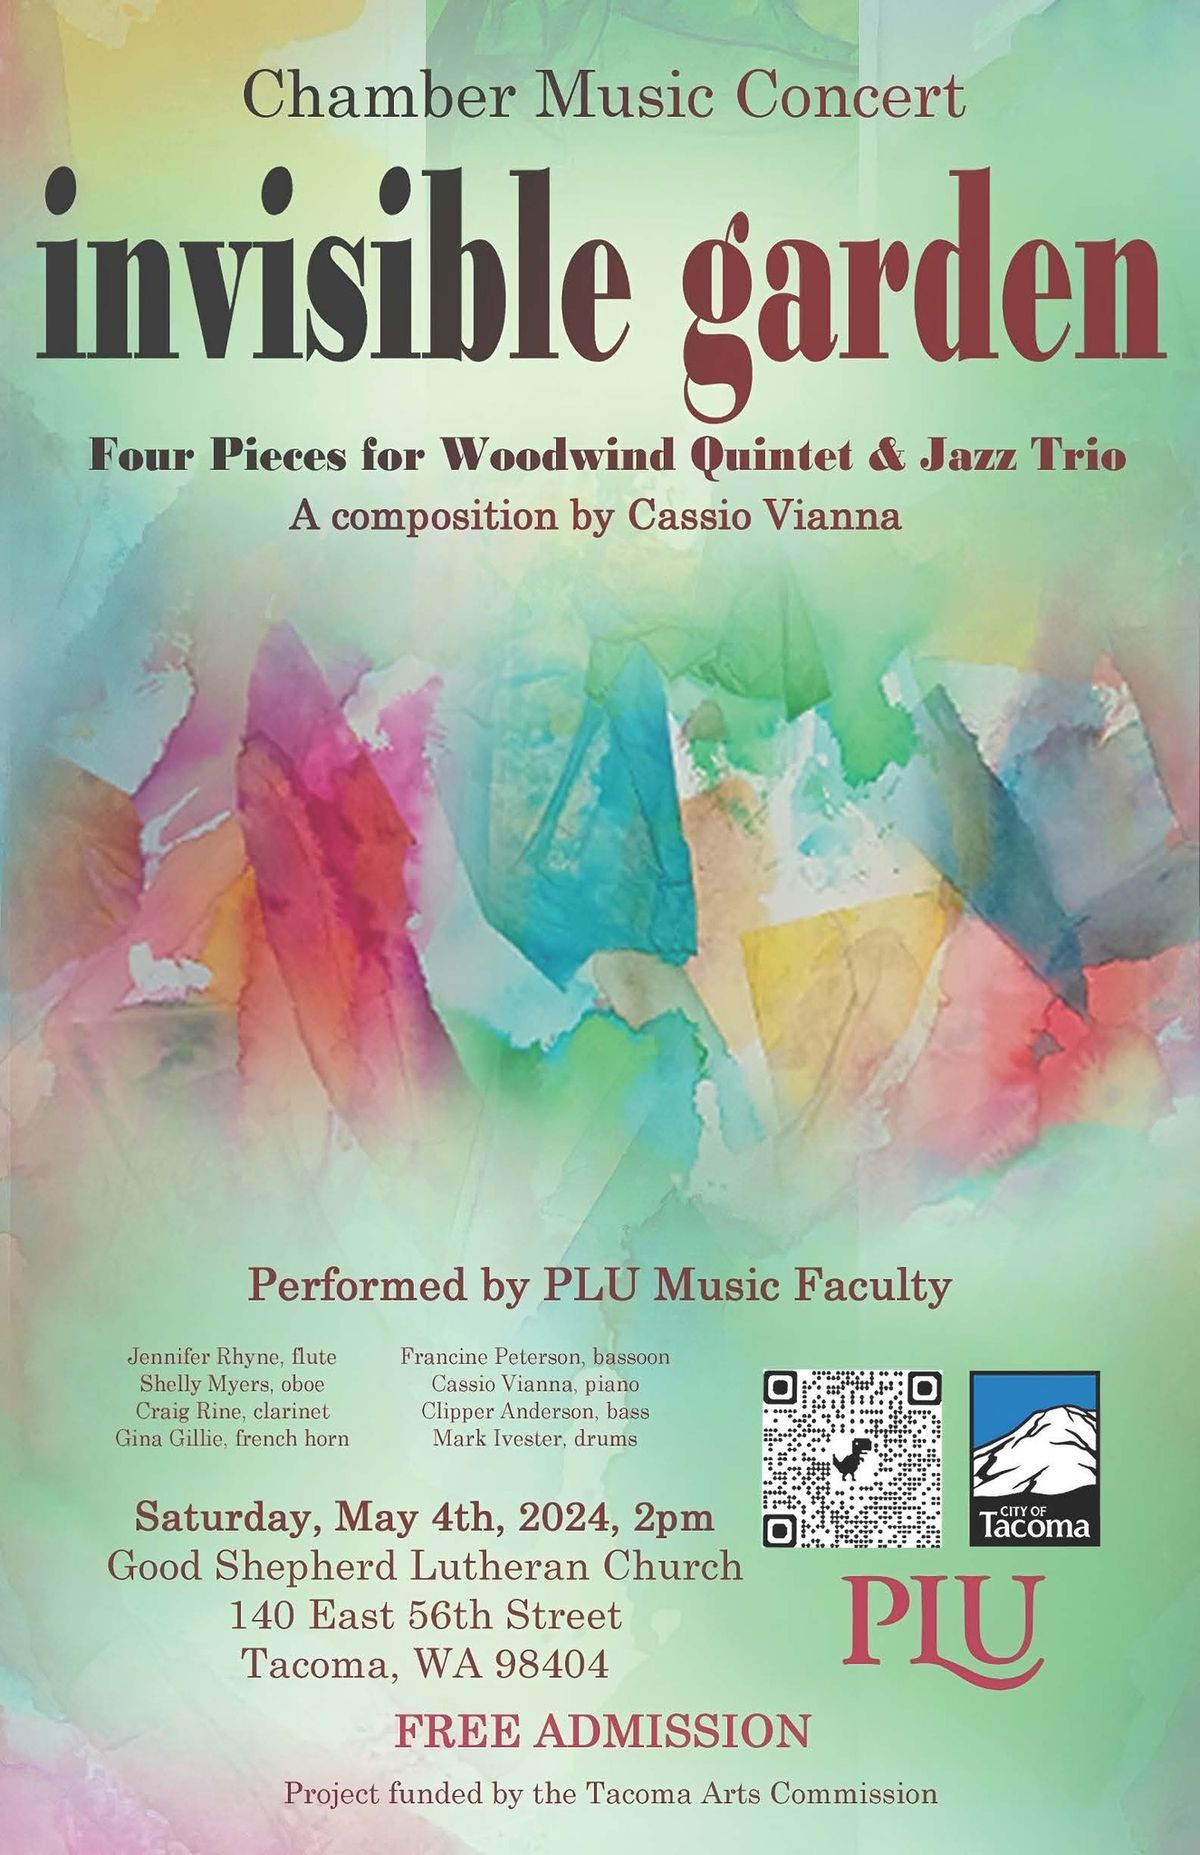 Invisible Garden: Four Pieces for Woodwind Quintet & Jazz Trio 